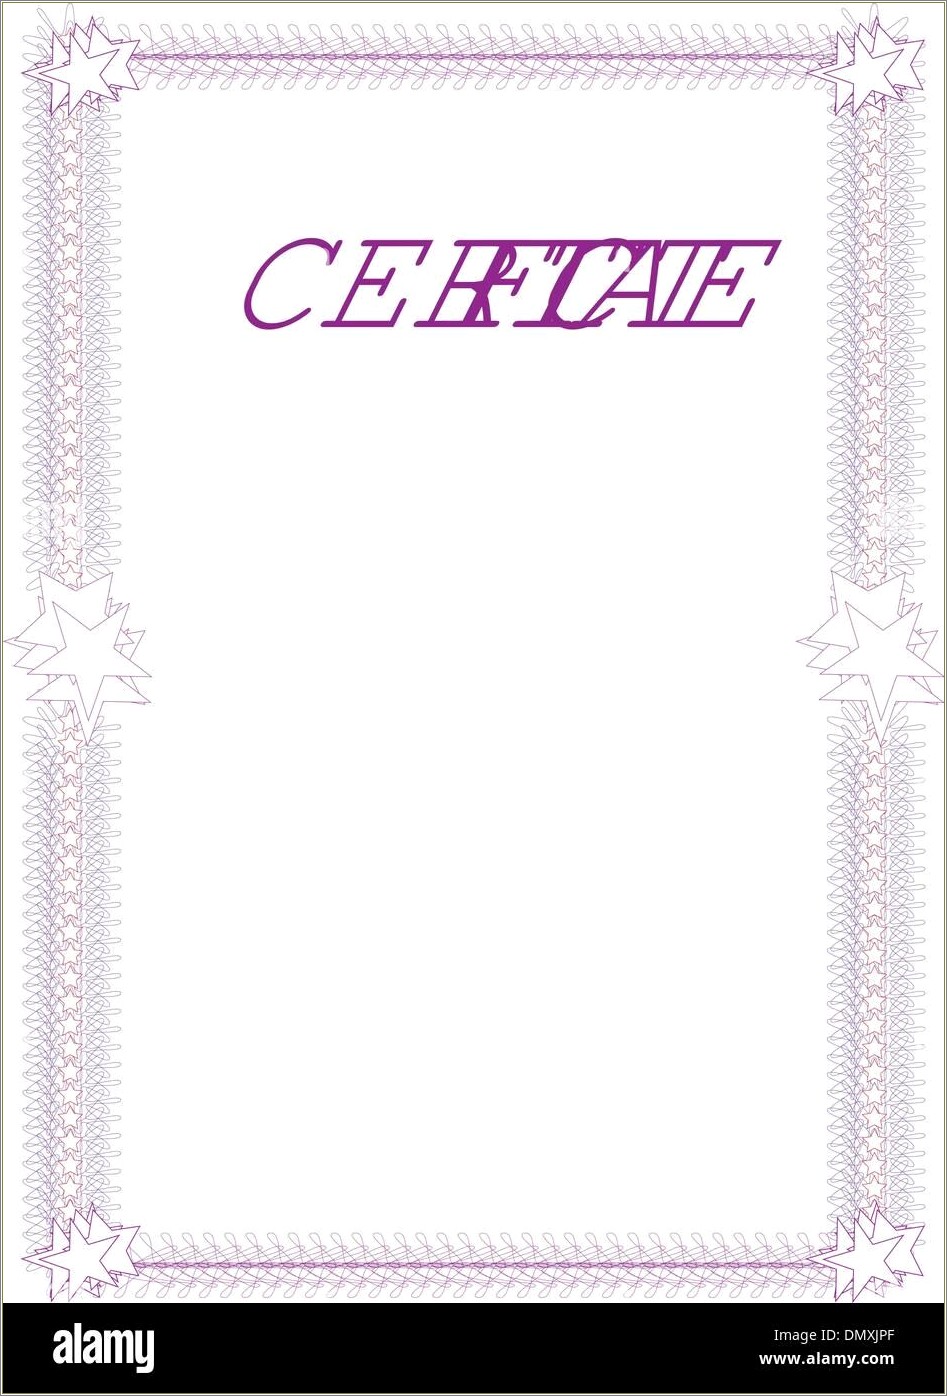 Free Purple Or Teal Colored Certificate Template